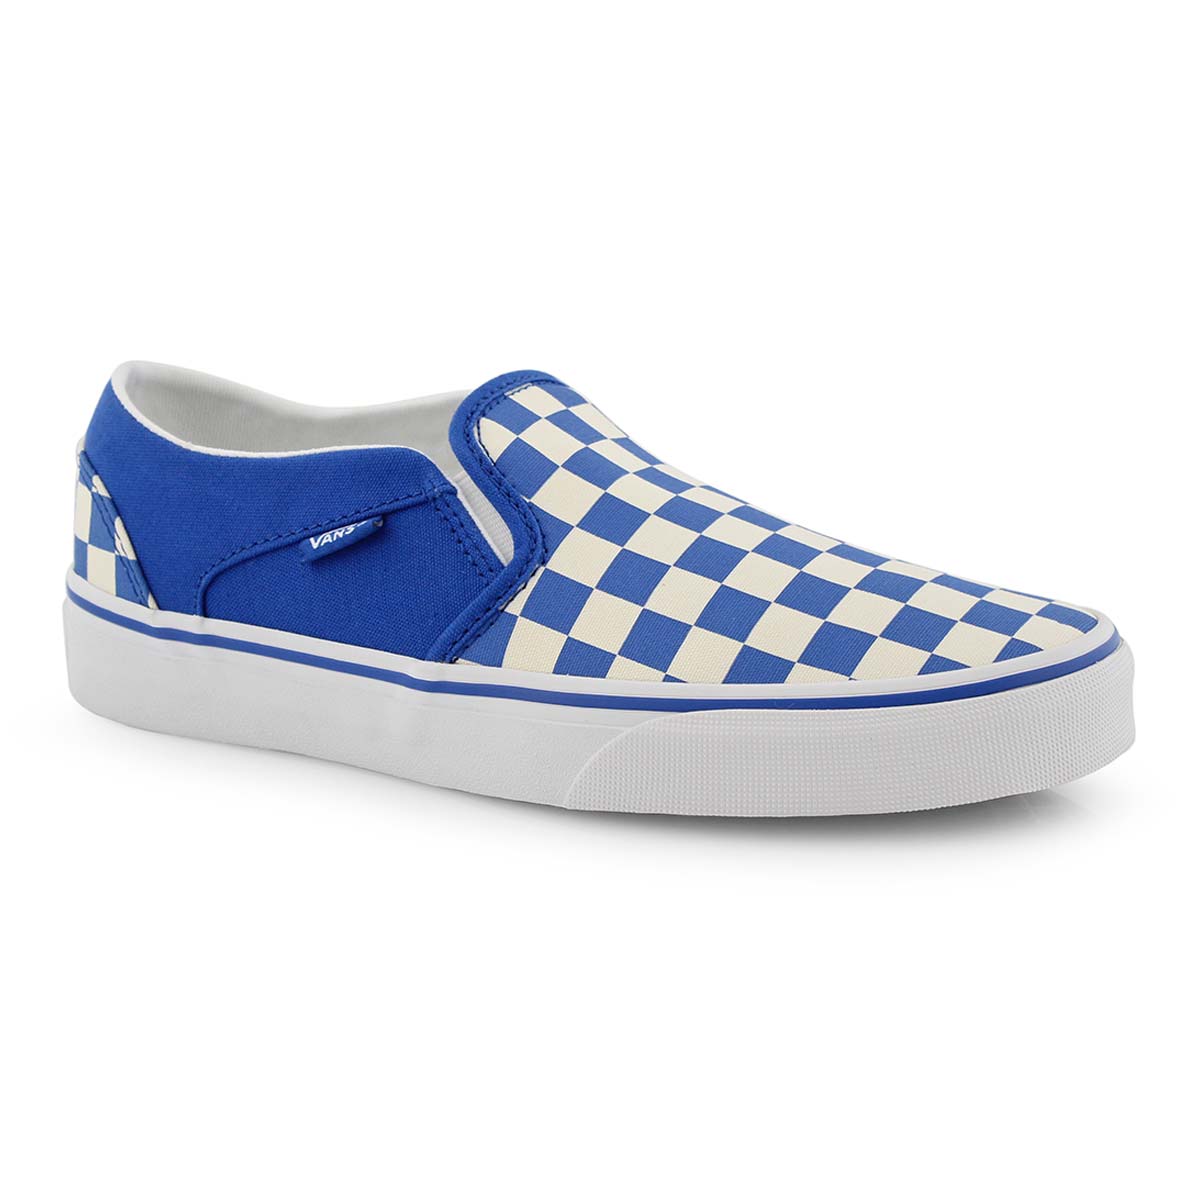 buy \u003e vans asher baby blue, Up to 70% OFF